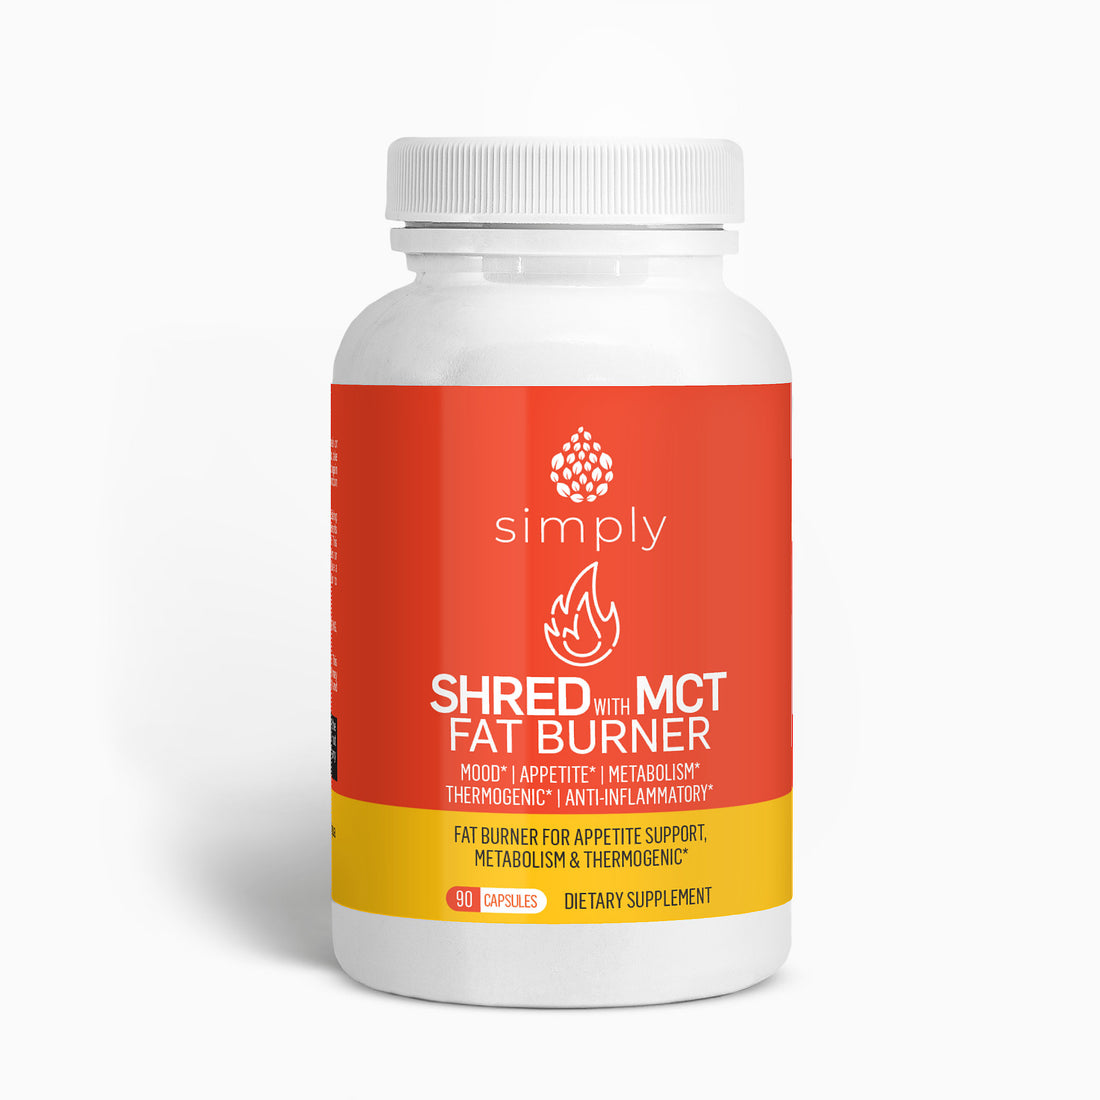 Shred with MCT Fat Burner dietary supplement